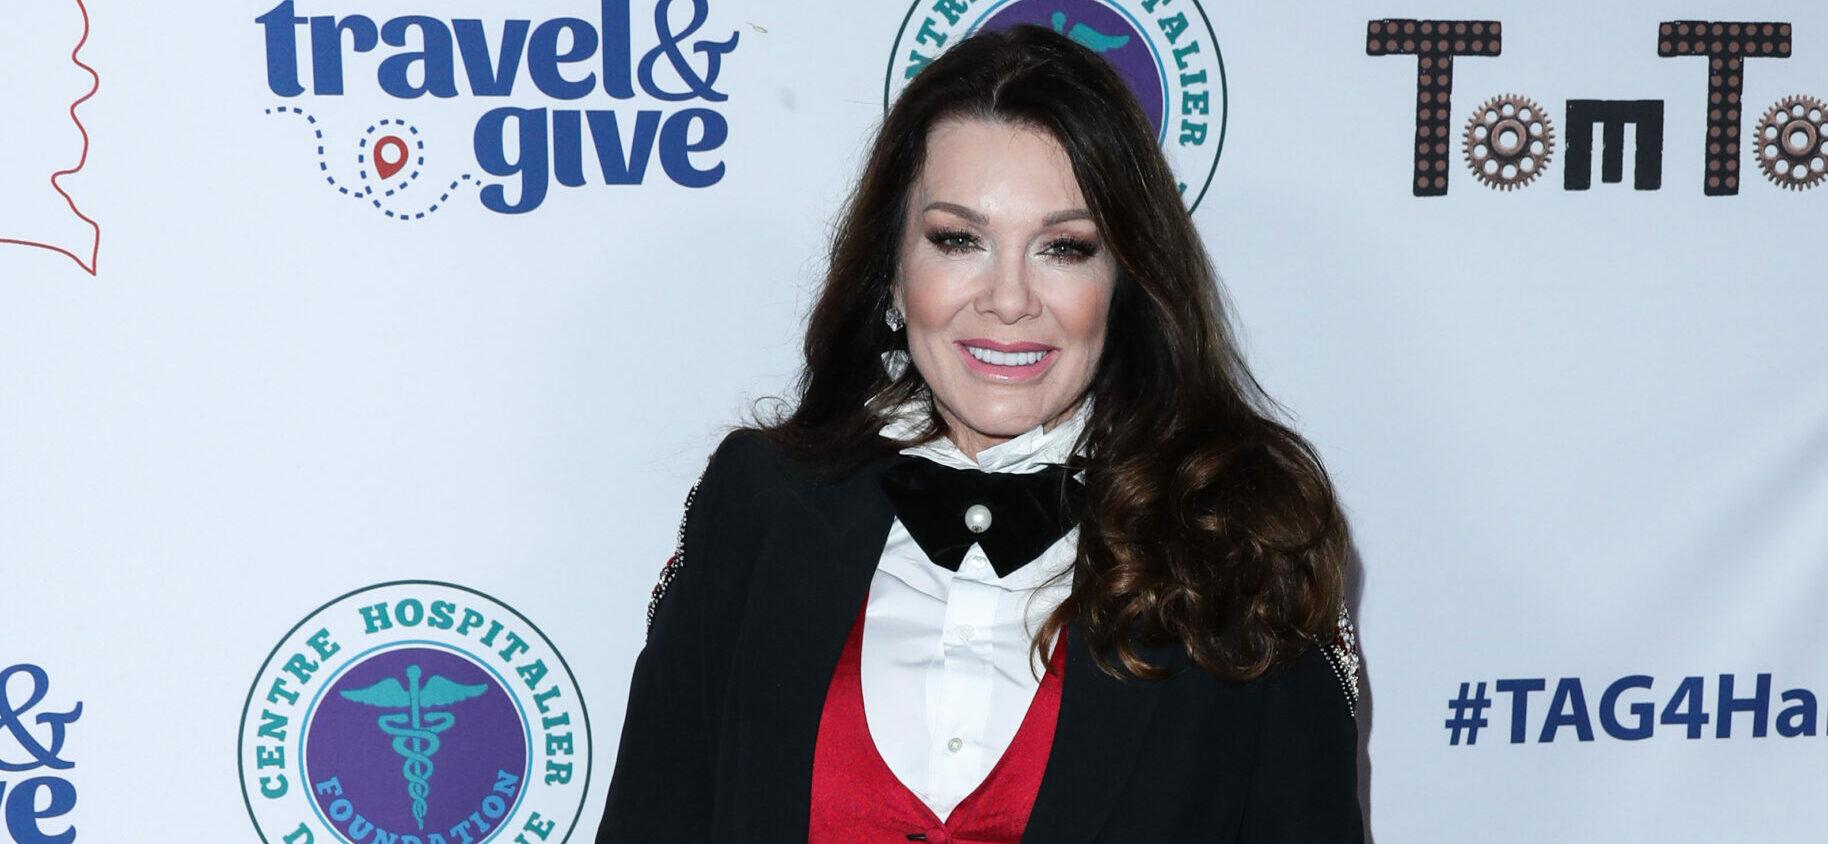 8 Classic Witty Remarks Lisa Vanderpump Made About Her Bravo Co-Stars